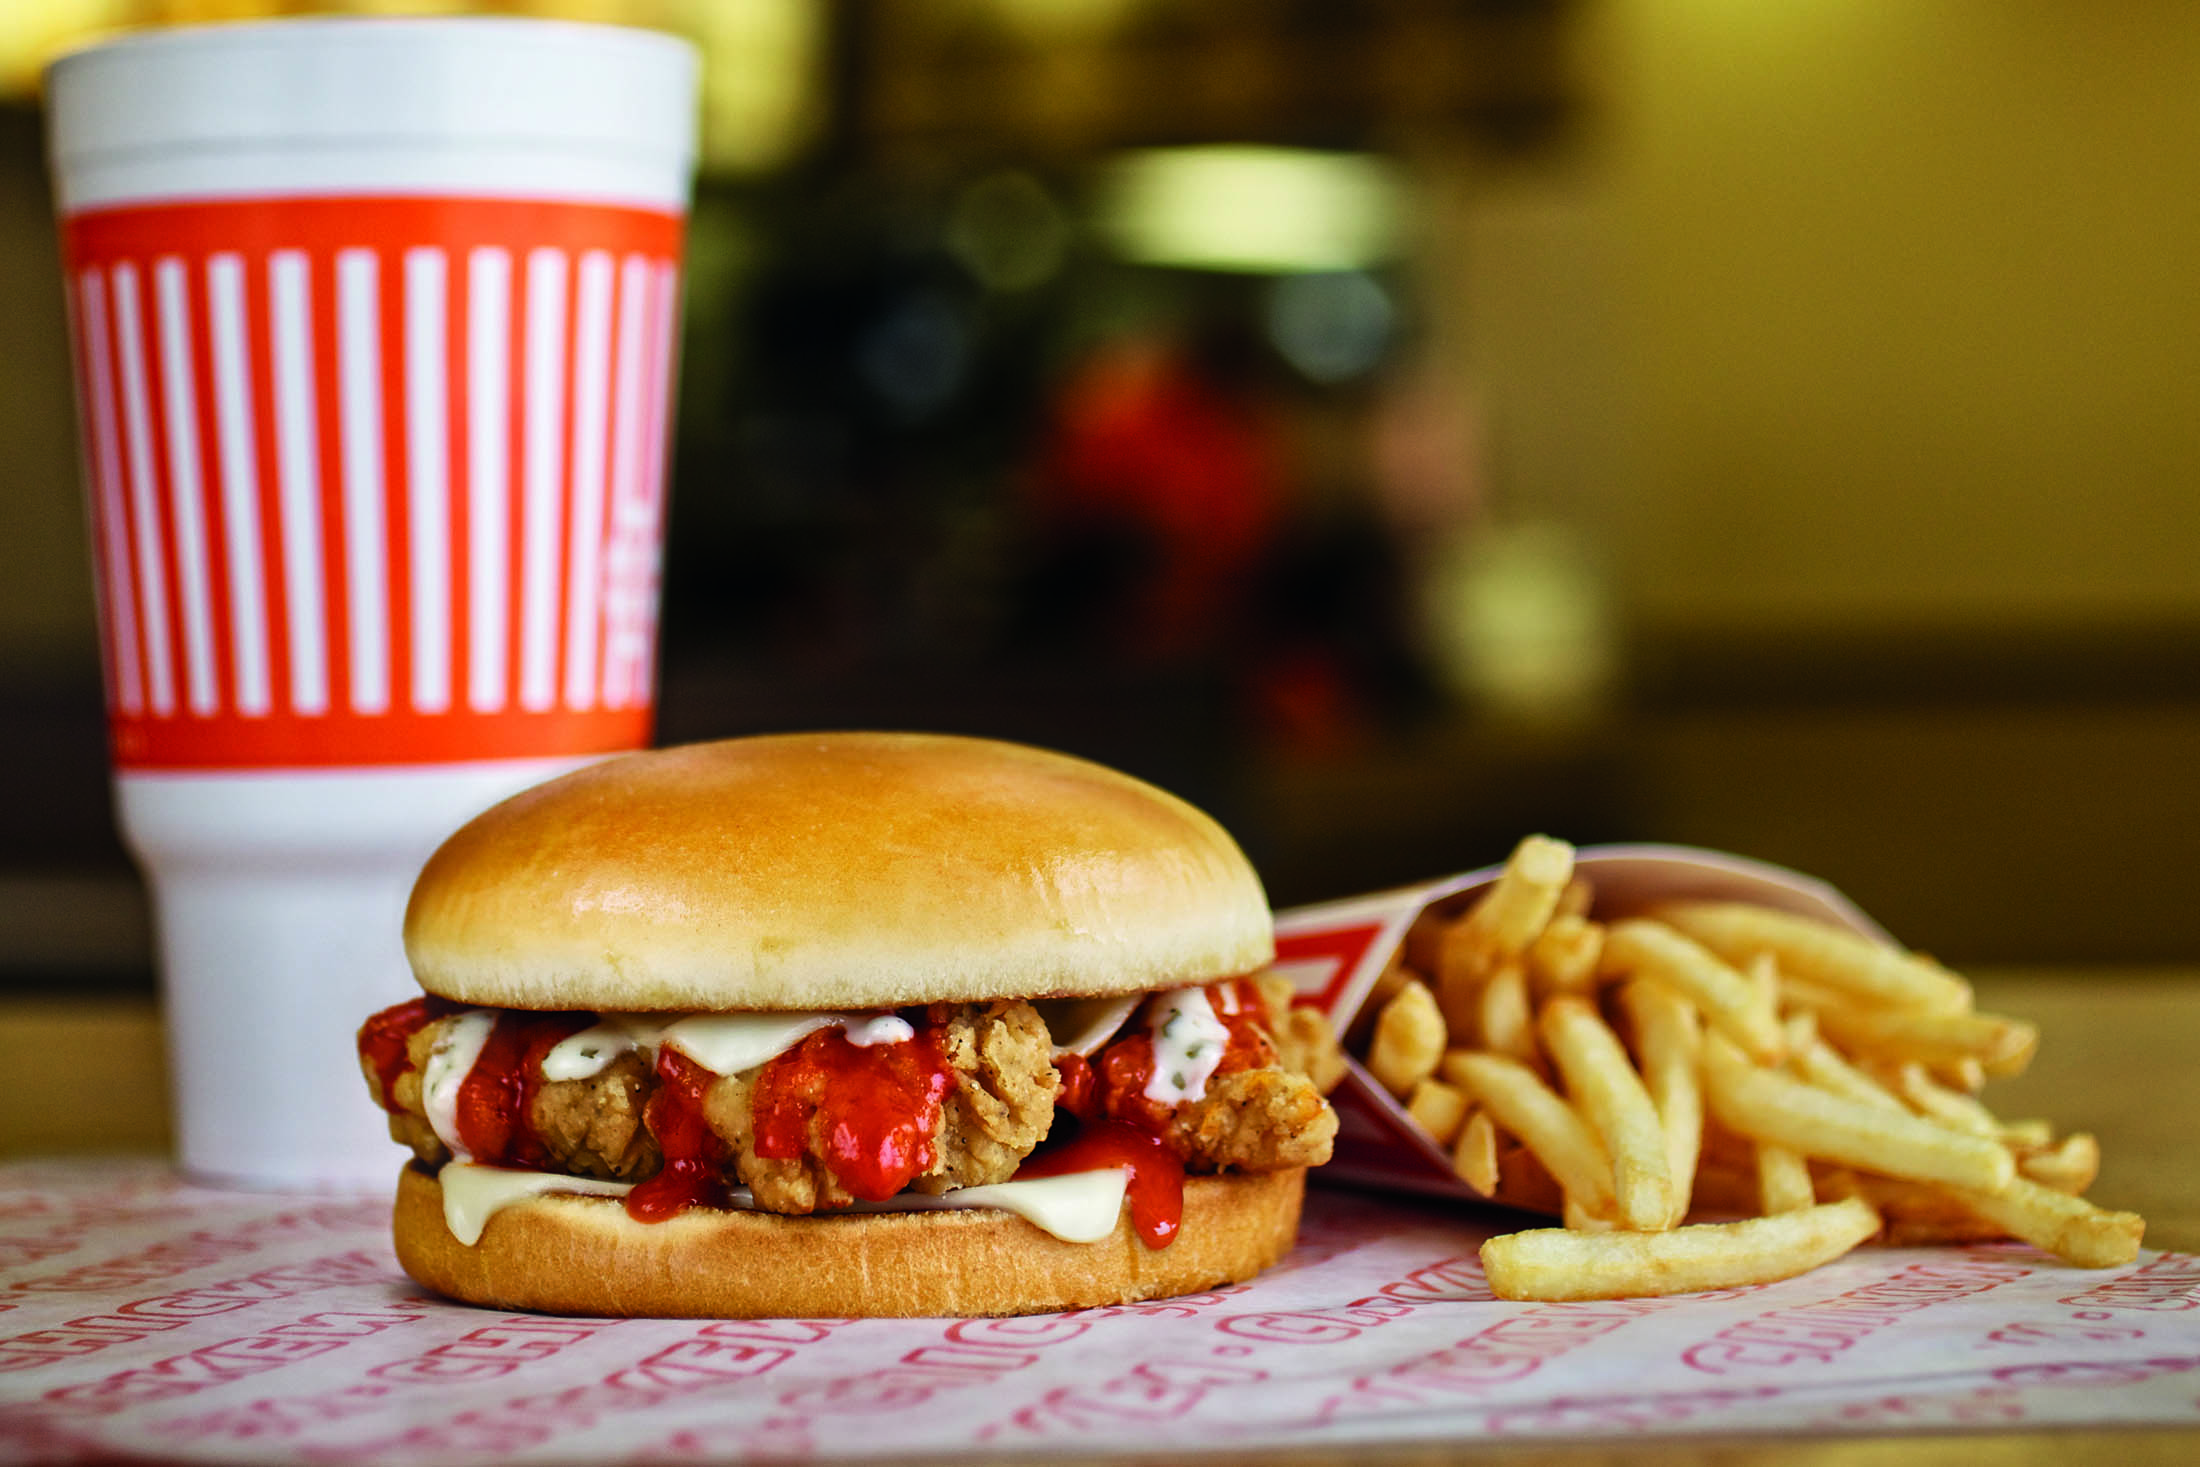 Whataburger - Our resolutions were this all along honestly.